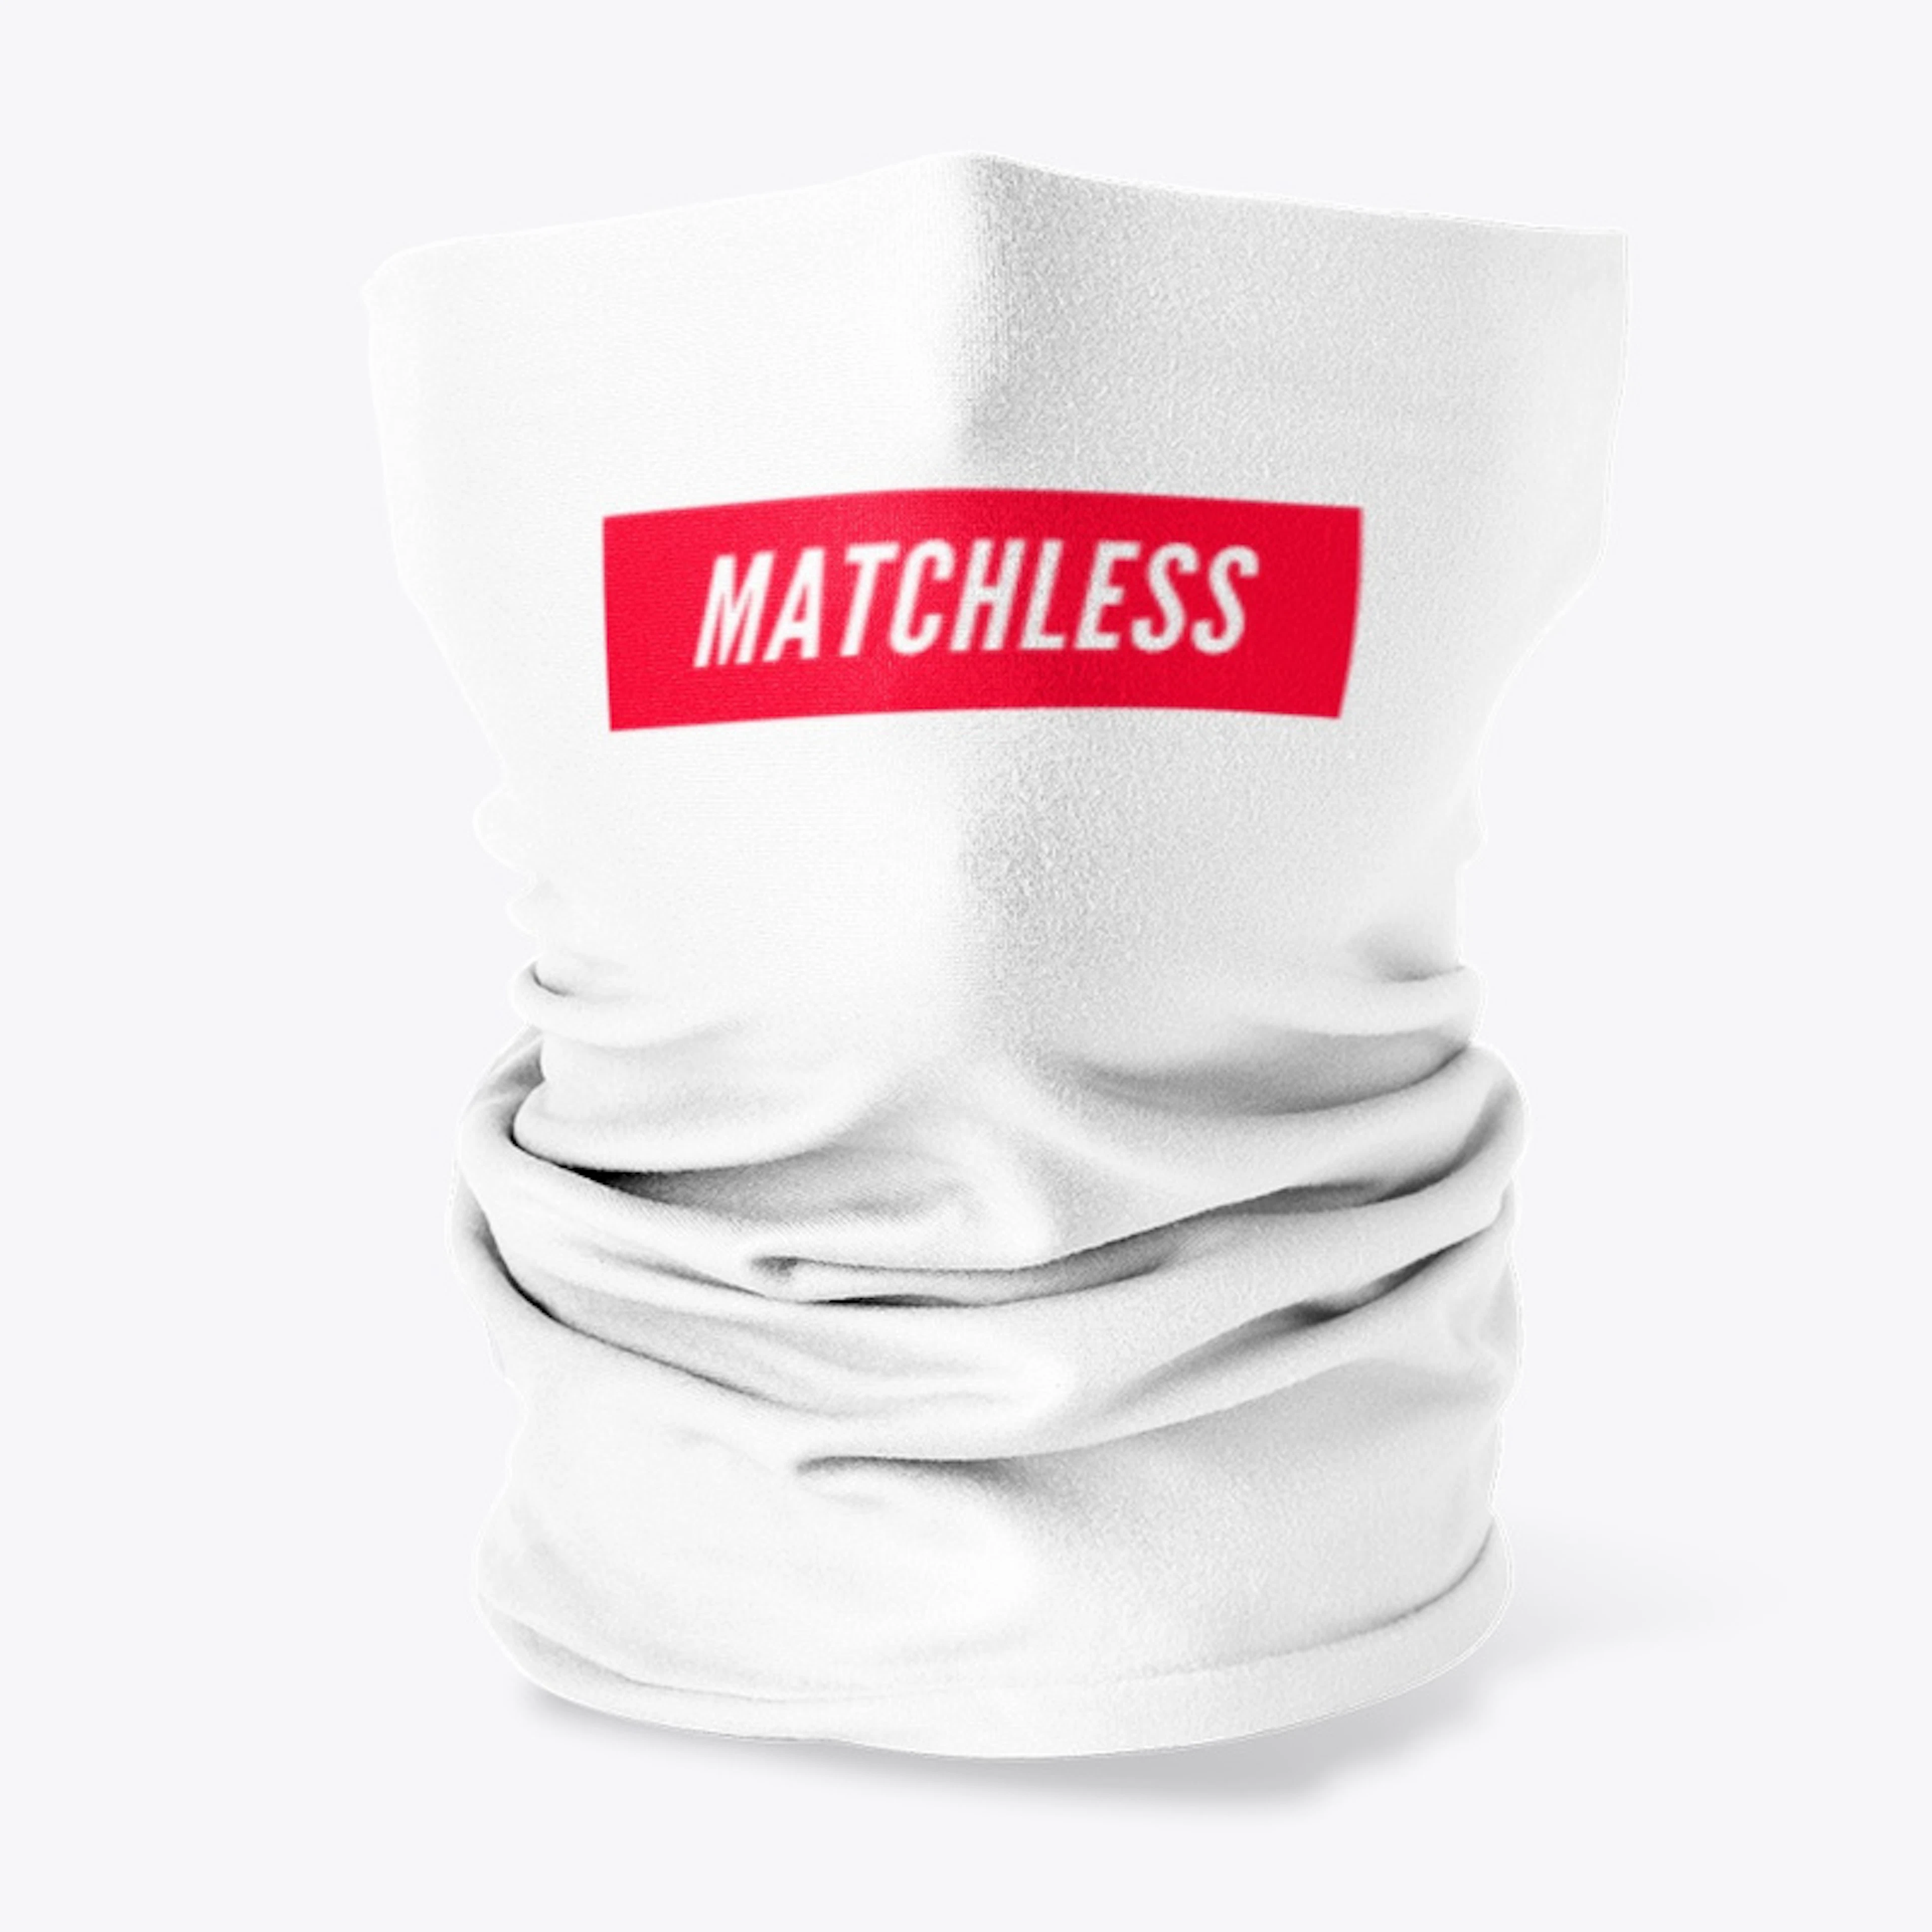 Matchless By Design